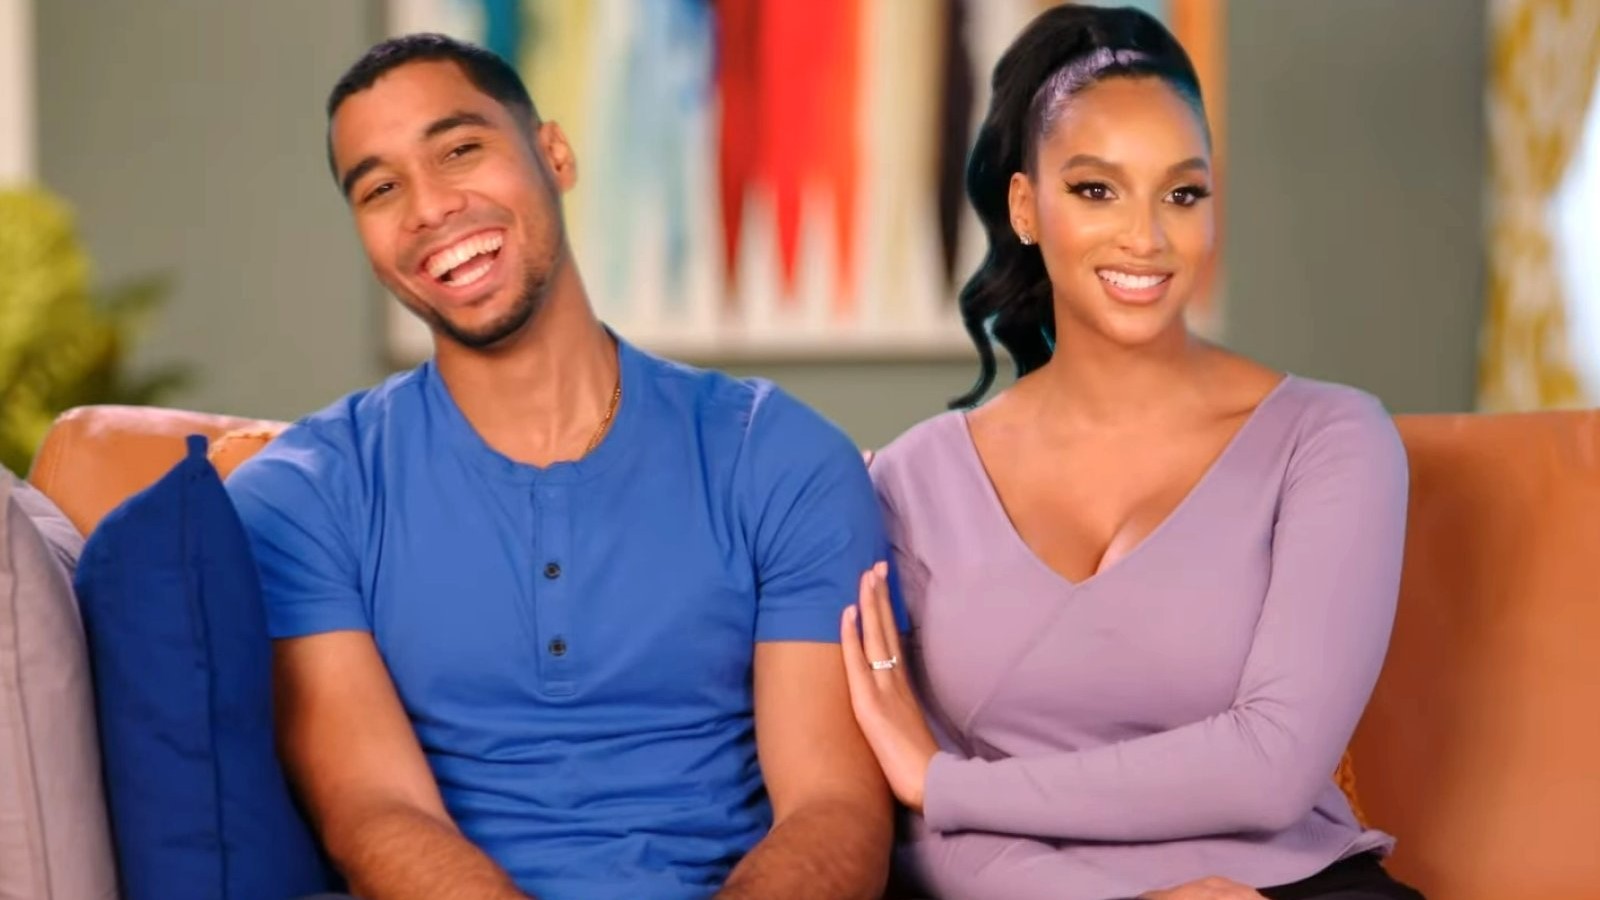 90 Day Fiancé spinoff The Family Chantel is returning What to Watch